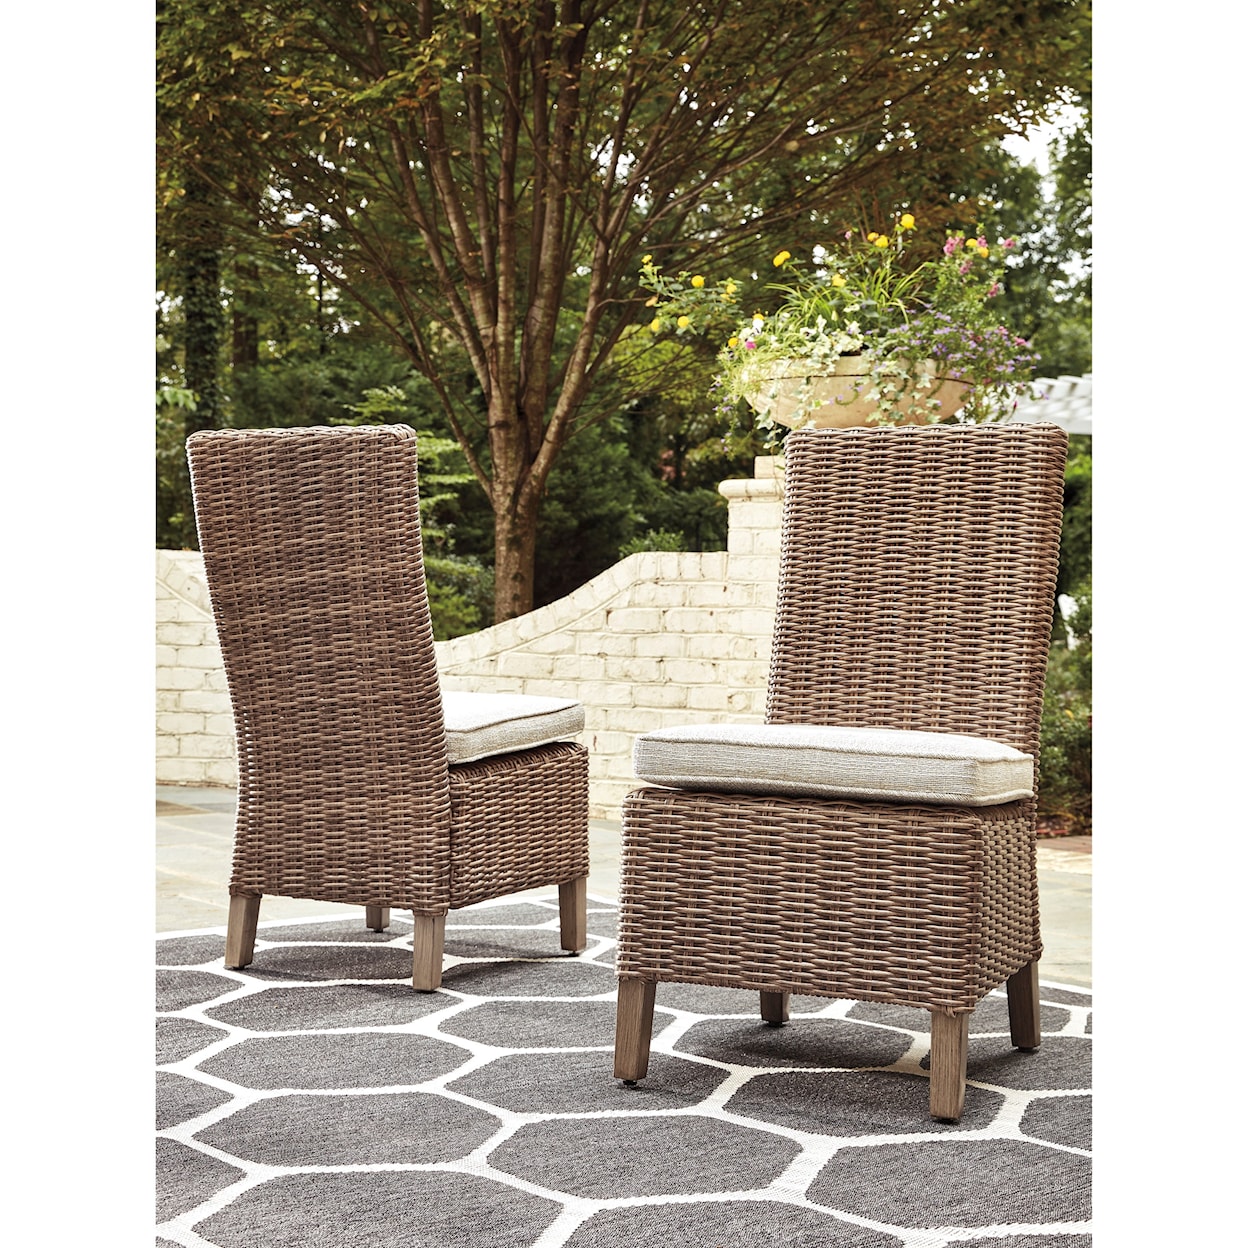 Ashley Signature Design Beachcroft Set of 2 Side Chairs with Cushion